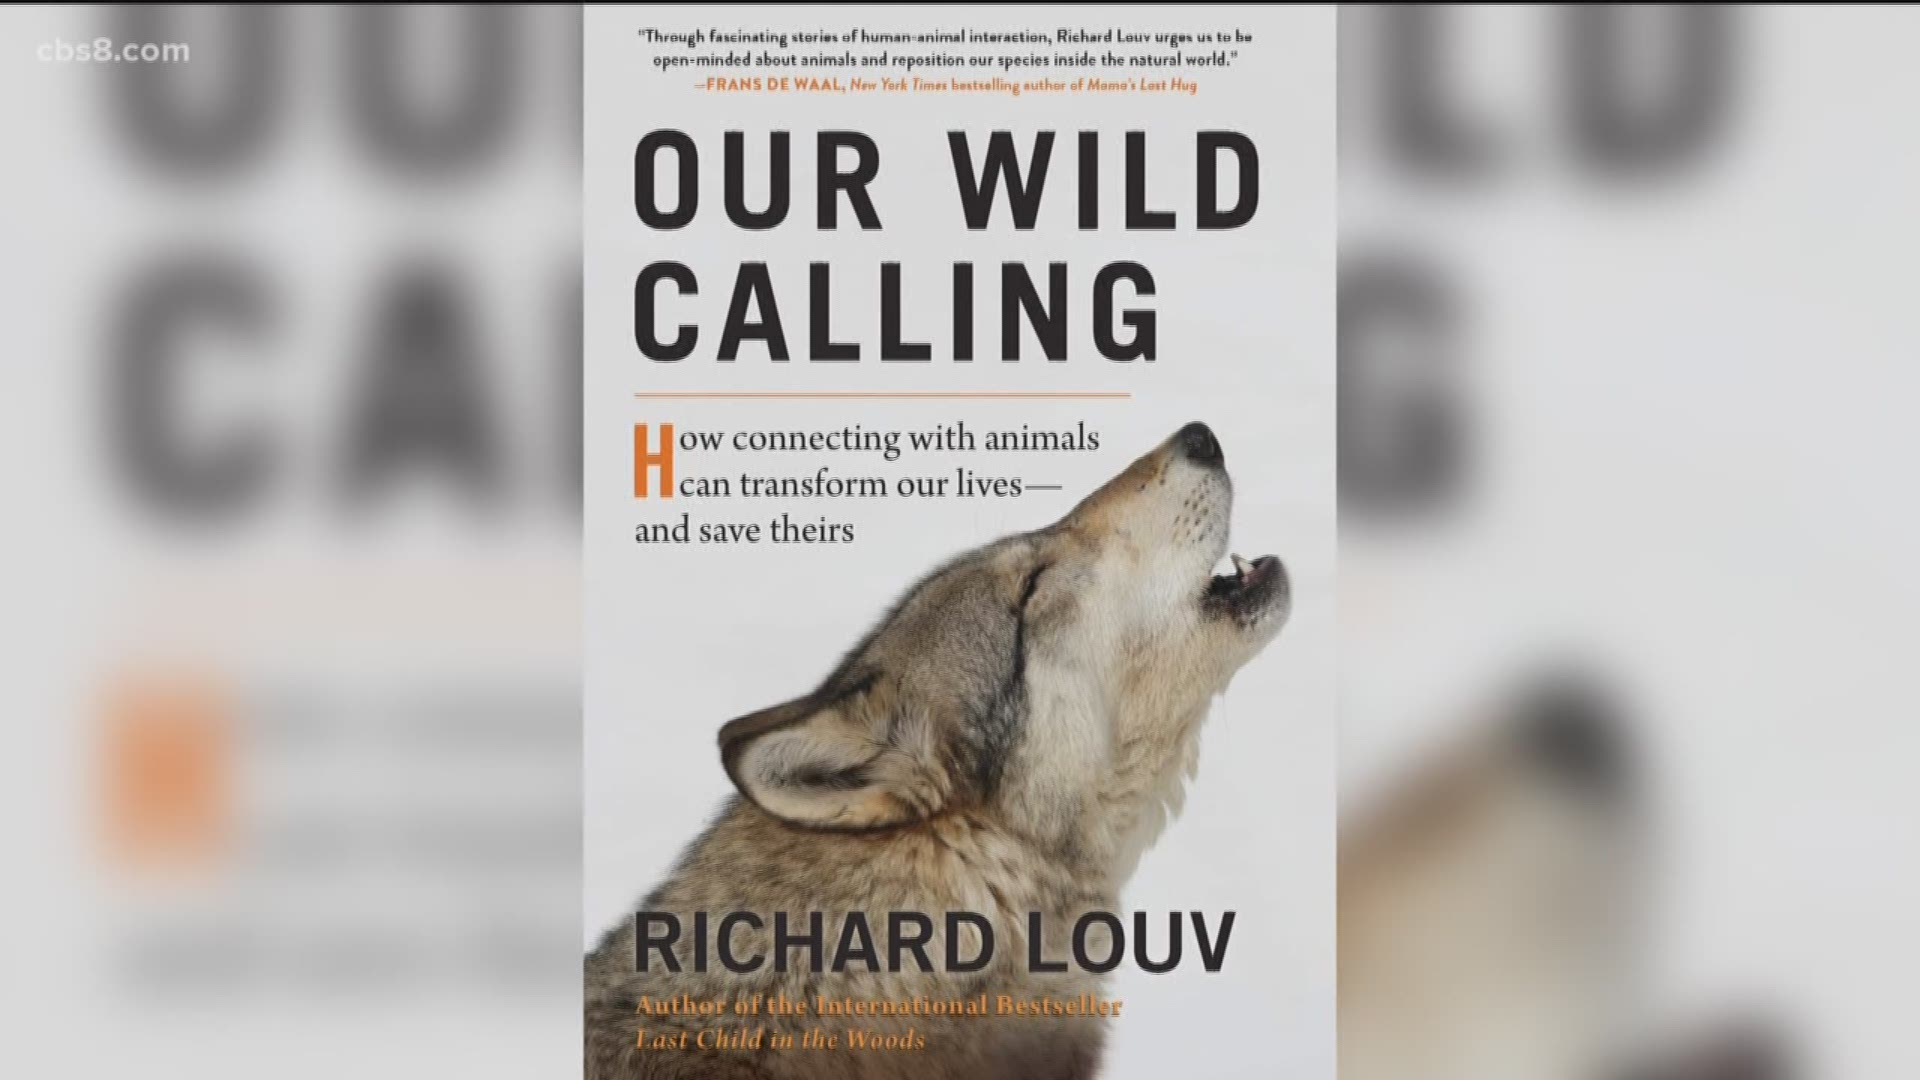 Richard Louv shares how our connection to animals can change our mental, physical, and spiritual lives